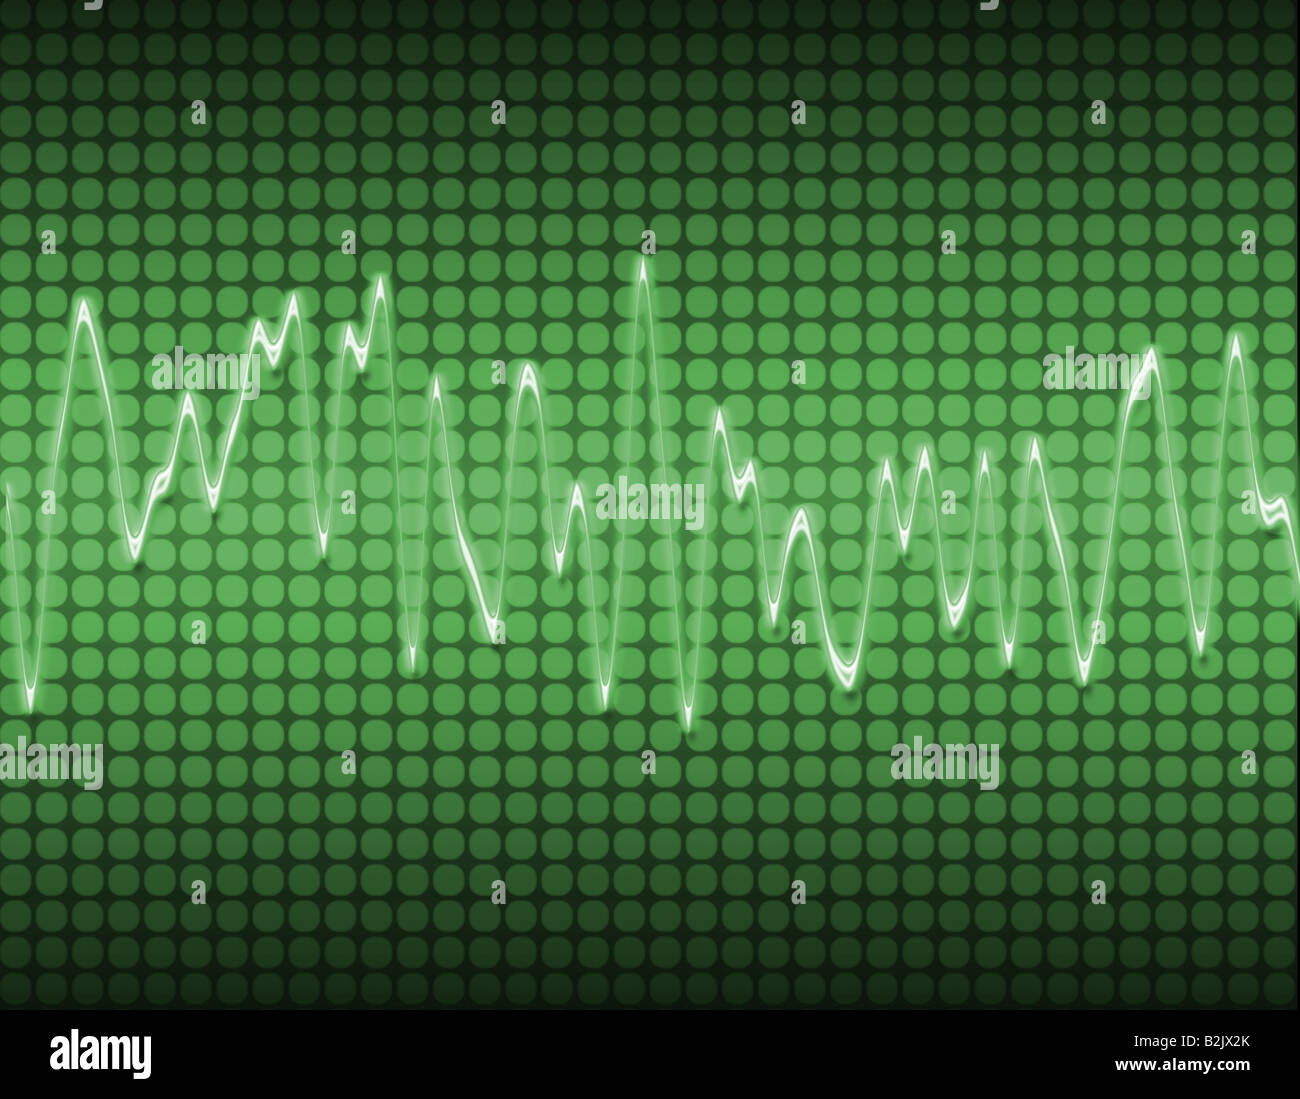 large image of an electronic sine sound or audio wave in green Stock Photo